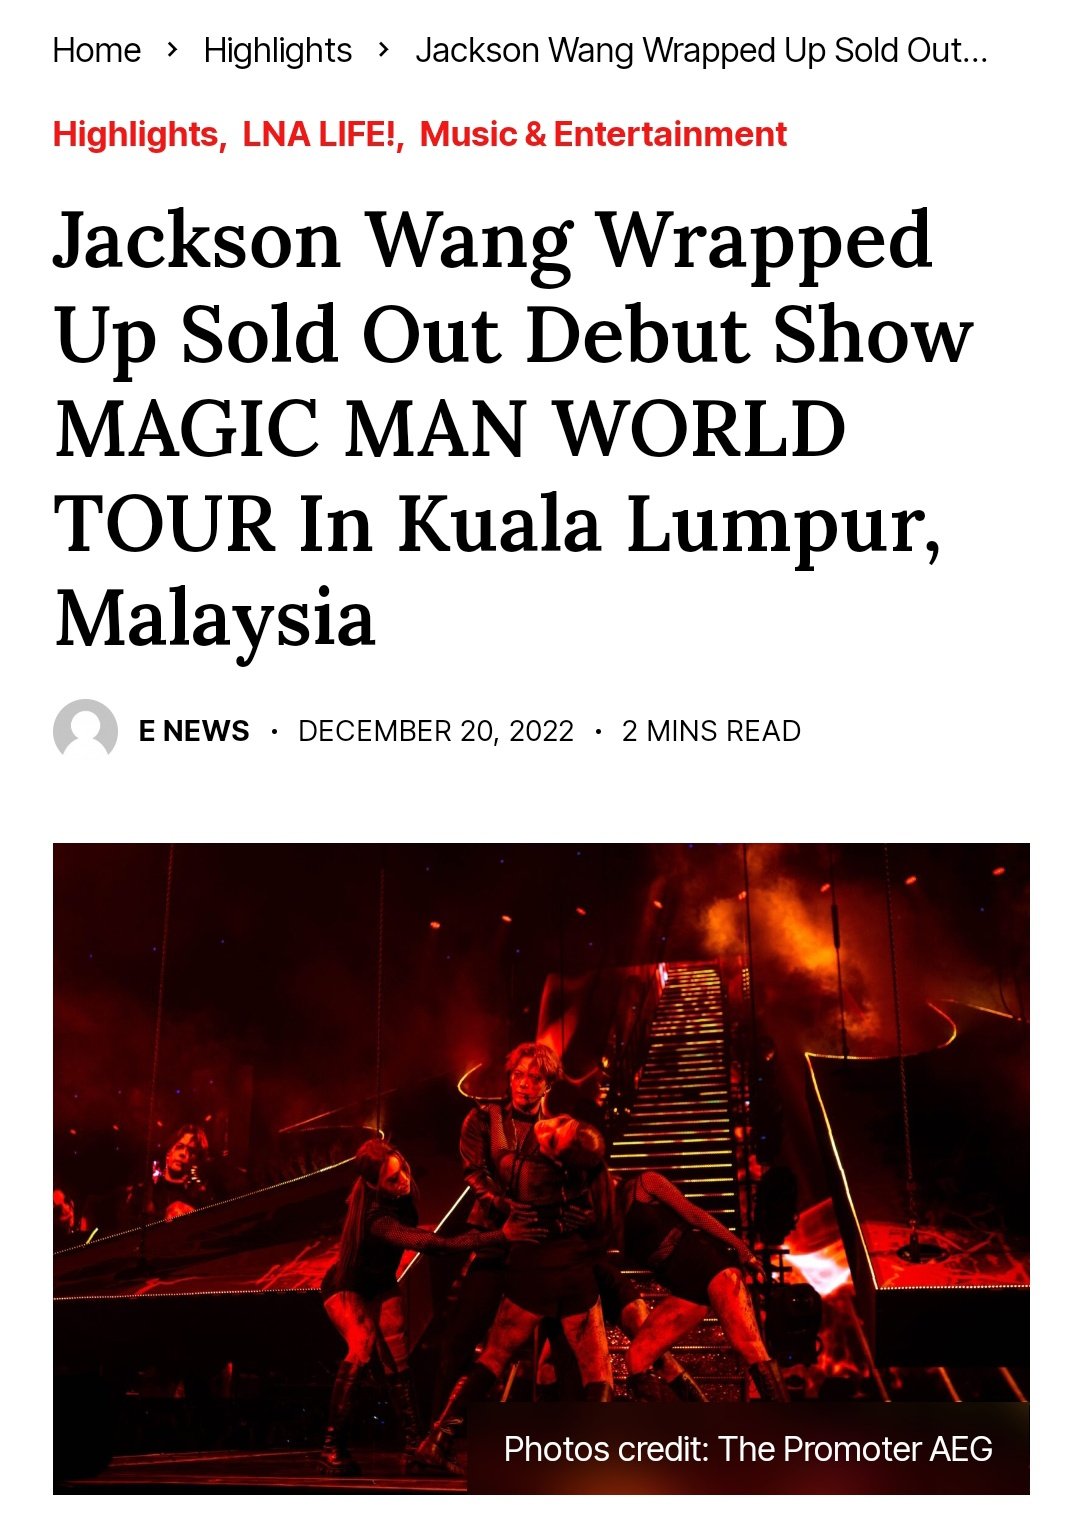 Jackson Wang wrapped up sold out 'Magic Man World Tour' in KL last